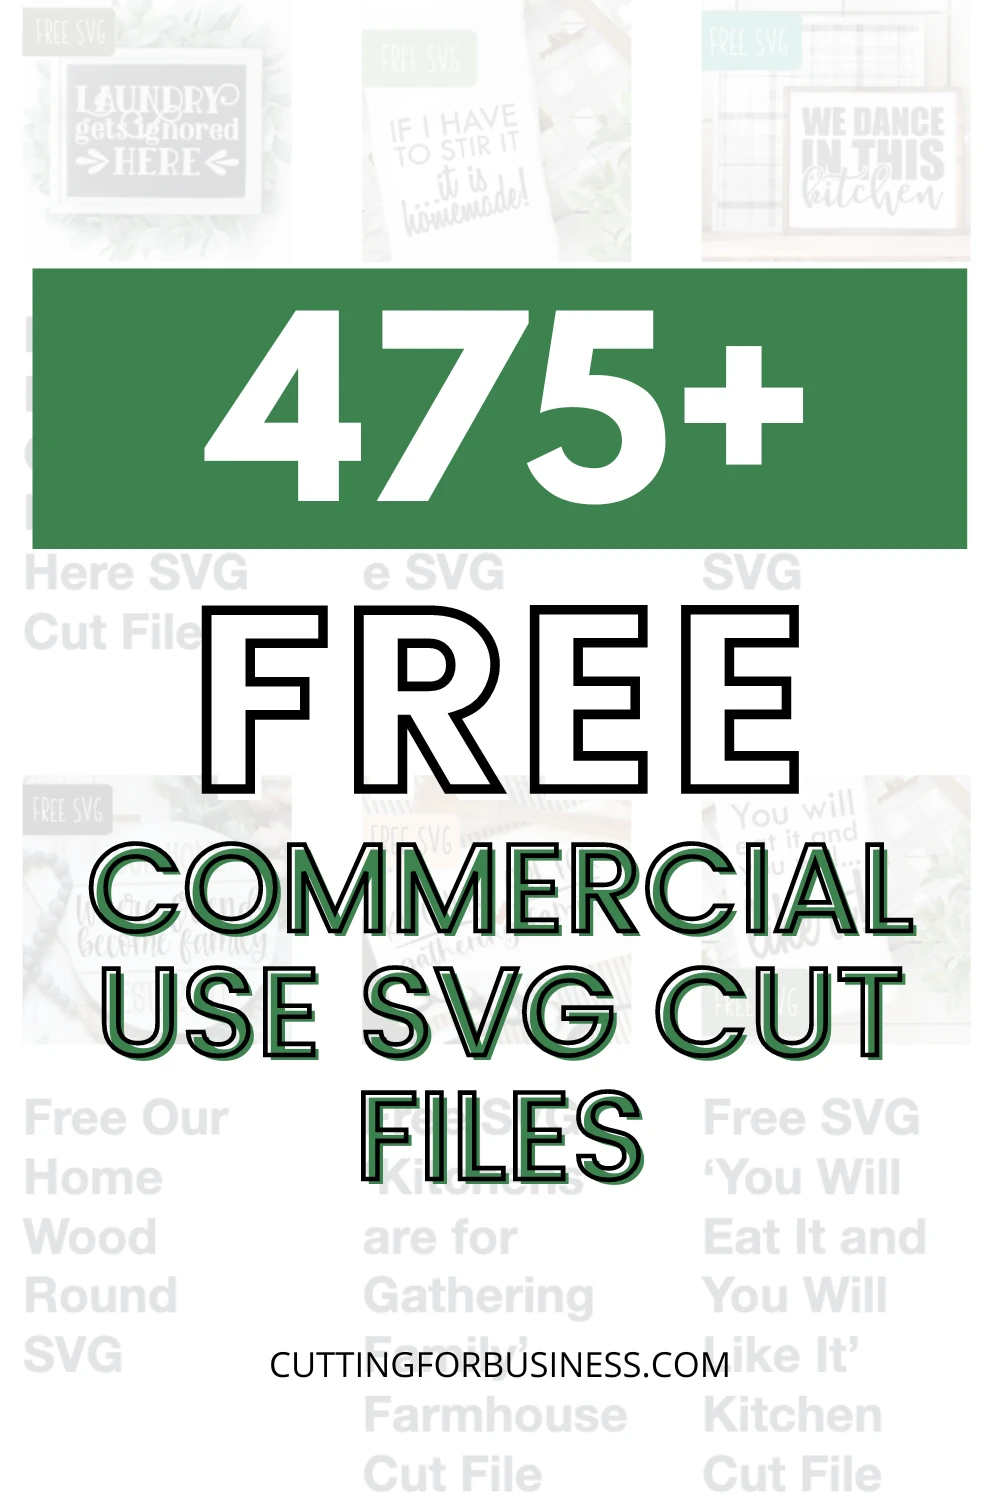 475+ Free SVG Cut Files with Commercial Use for Silhouette, Cricut, Glowforge, Juliet, and xTool users - cuttingforbusiness.com.